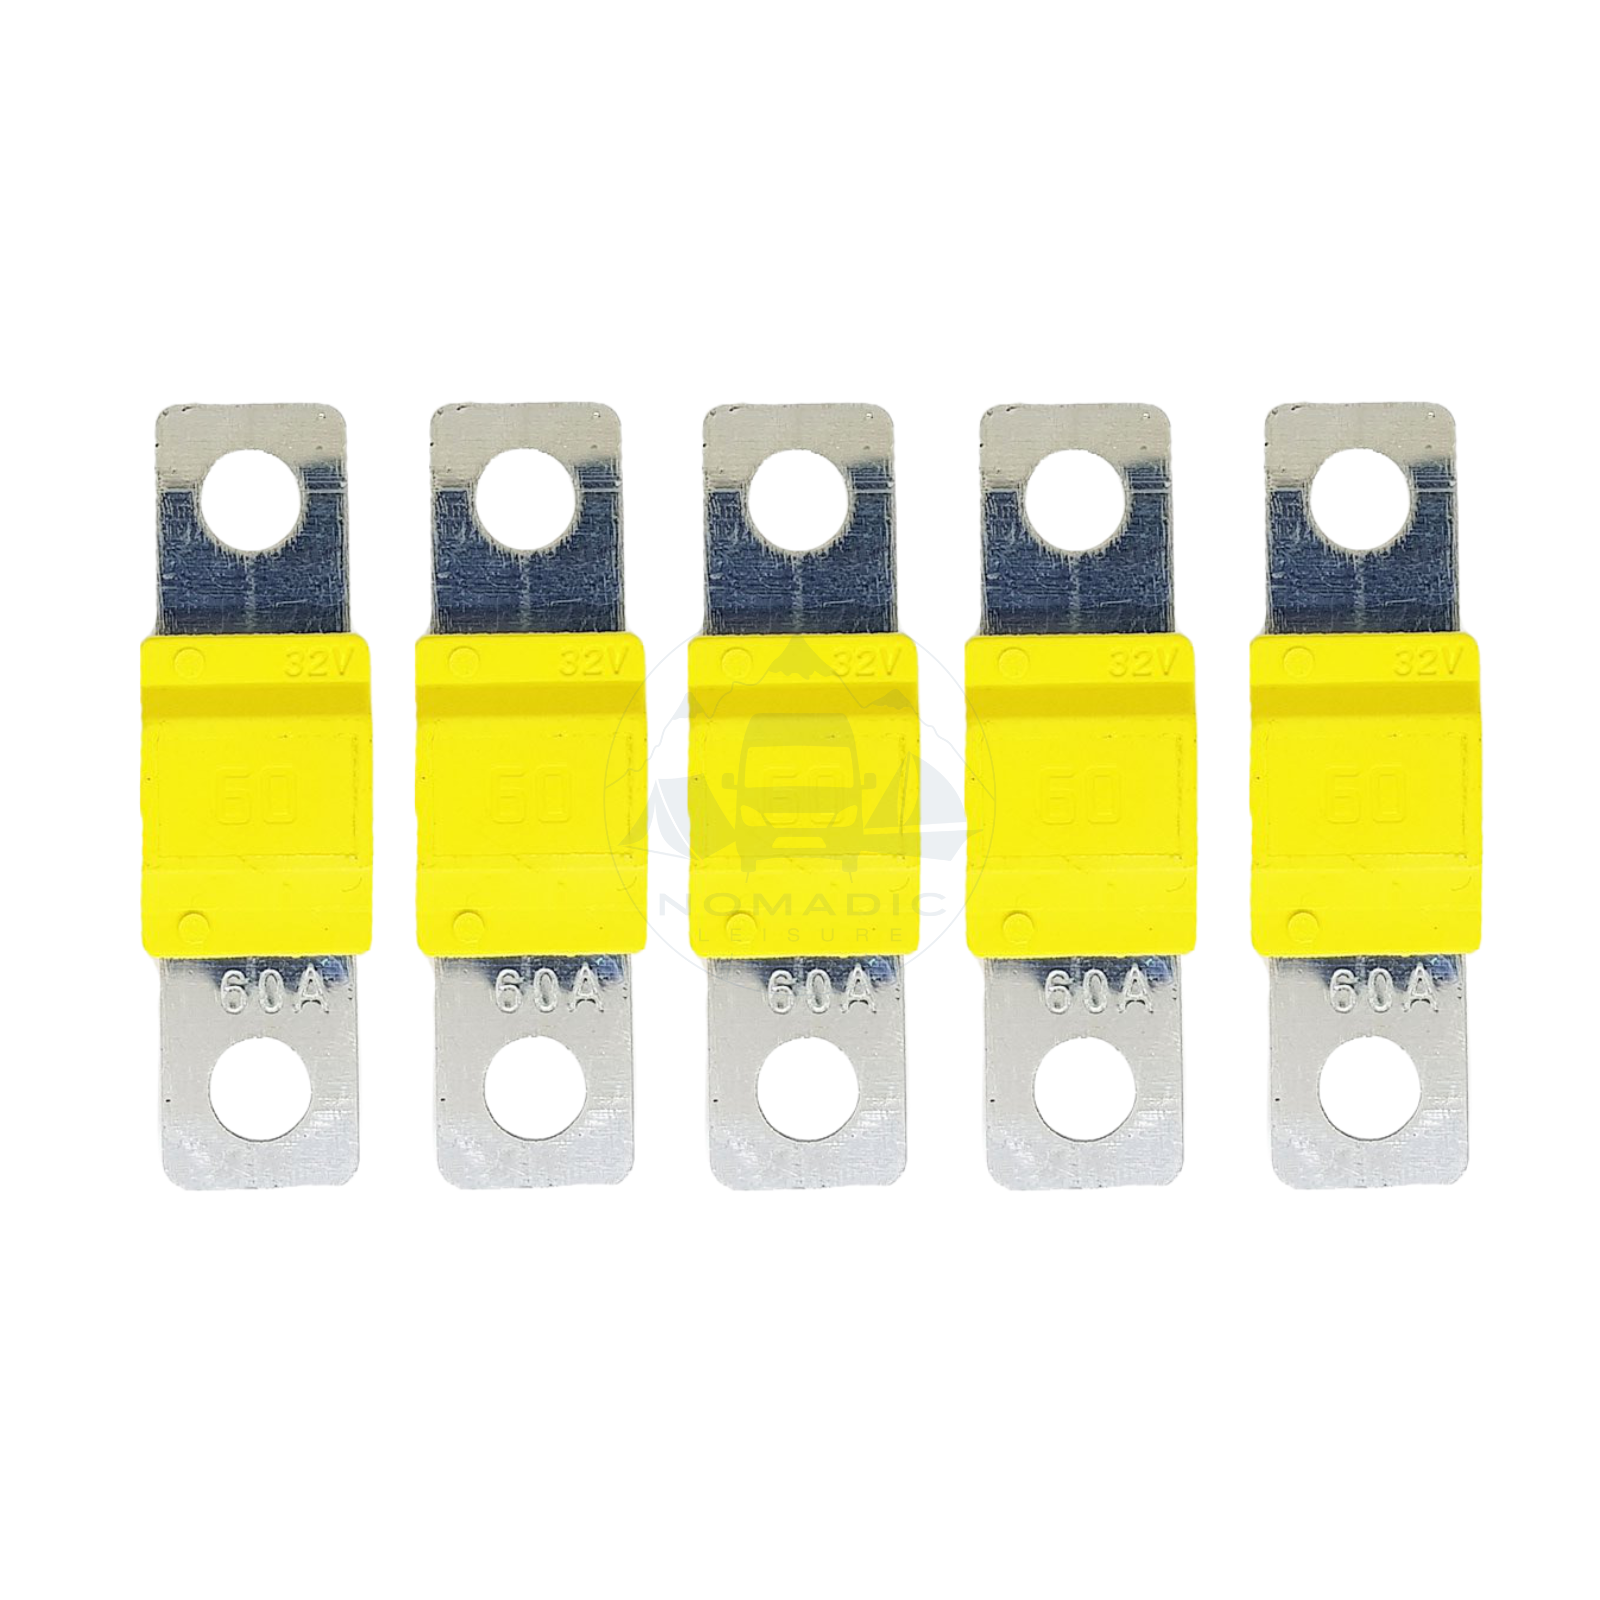 Midi Fuse/Link Fuses 30A-200A – 60A – 5 Pack – Nomadic Leisure